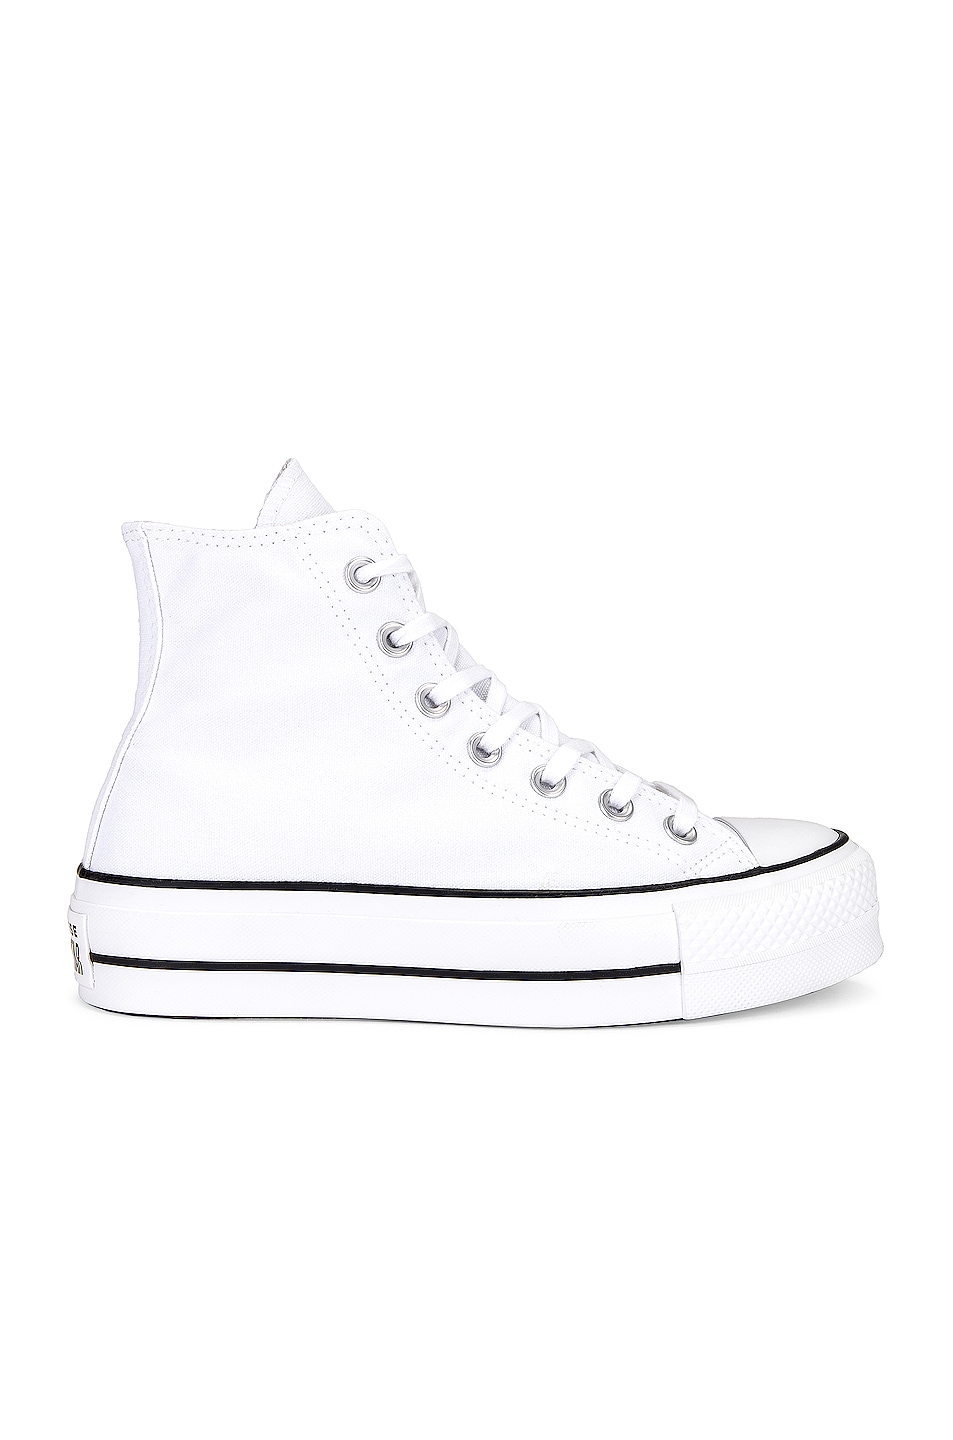 Image 1 of Converse Chuck Taylor All Star Lift Hi in White & Black